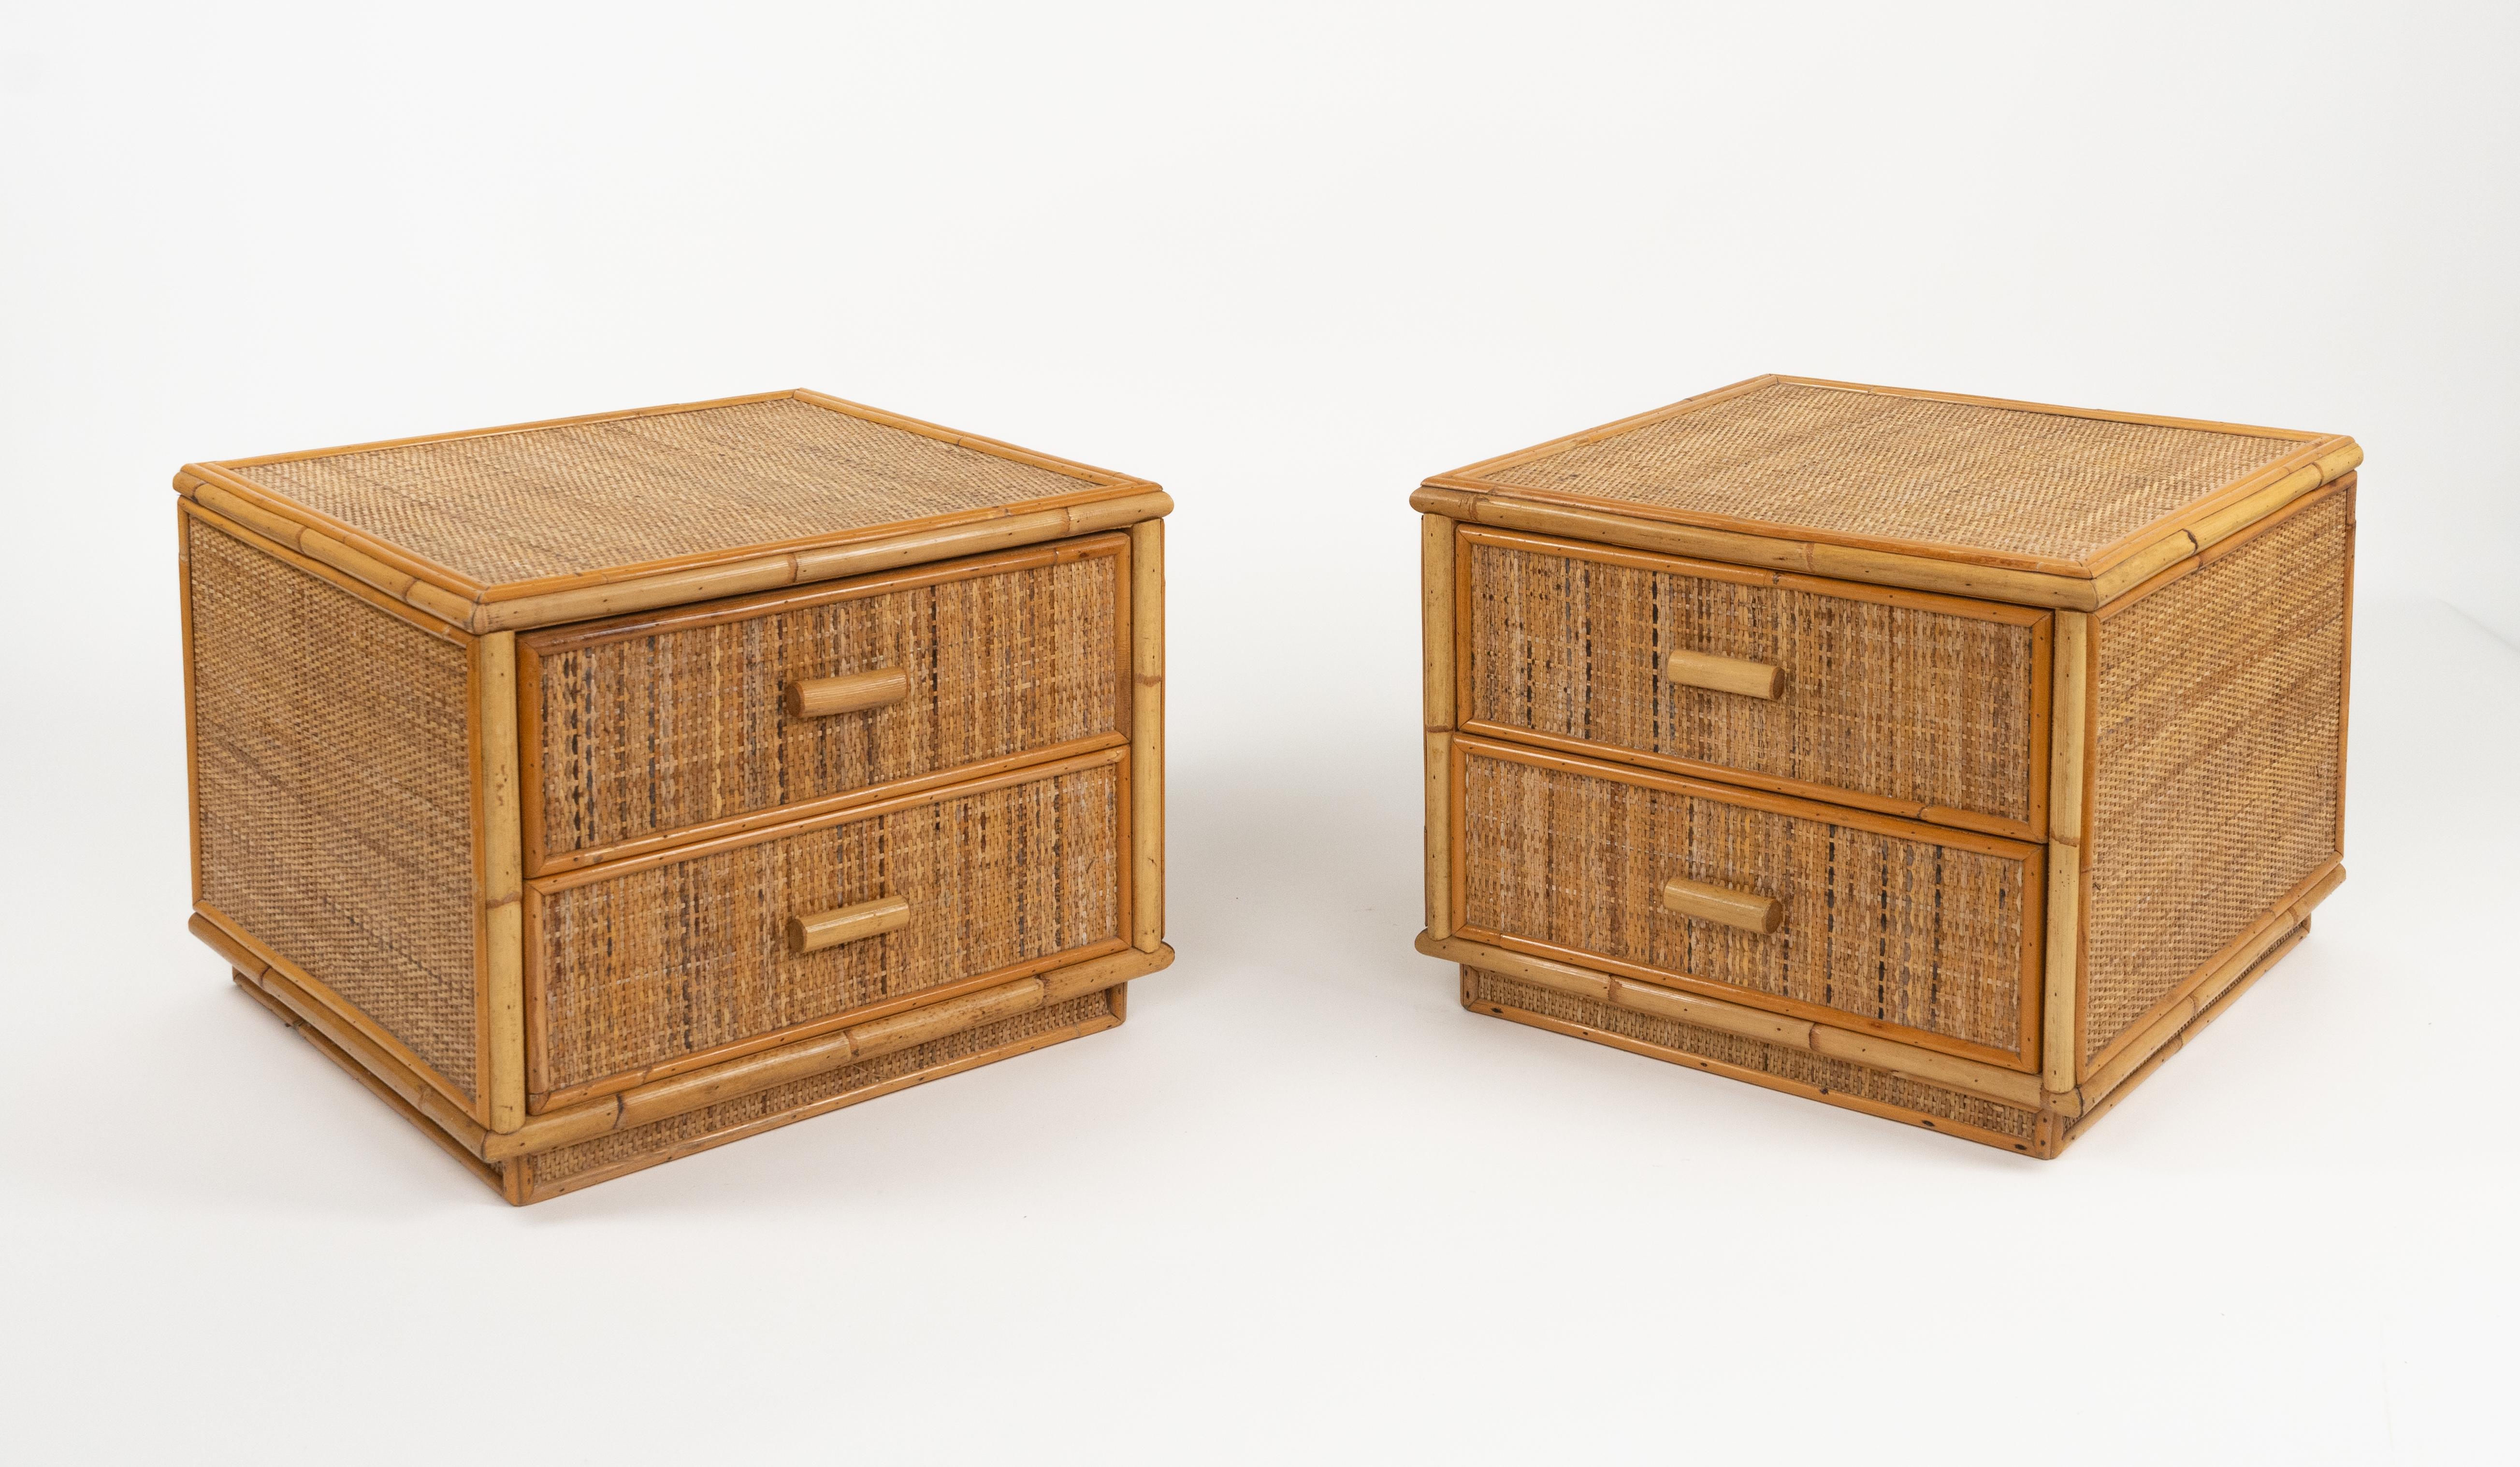 Midcentury beautiful pair of bedside tables / nightstands with two-drawer in bamboo, rattan and wicker in the style of Dal Vera.

Made in Italy in the 1970s.